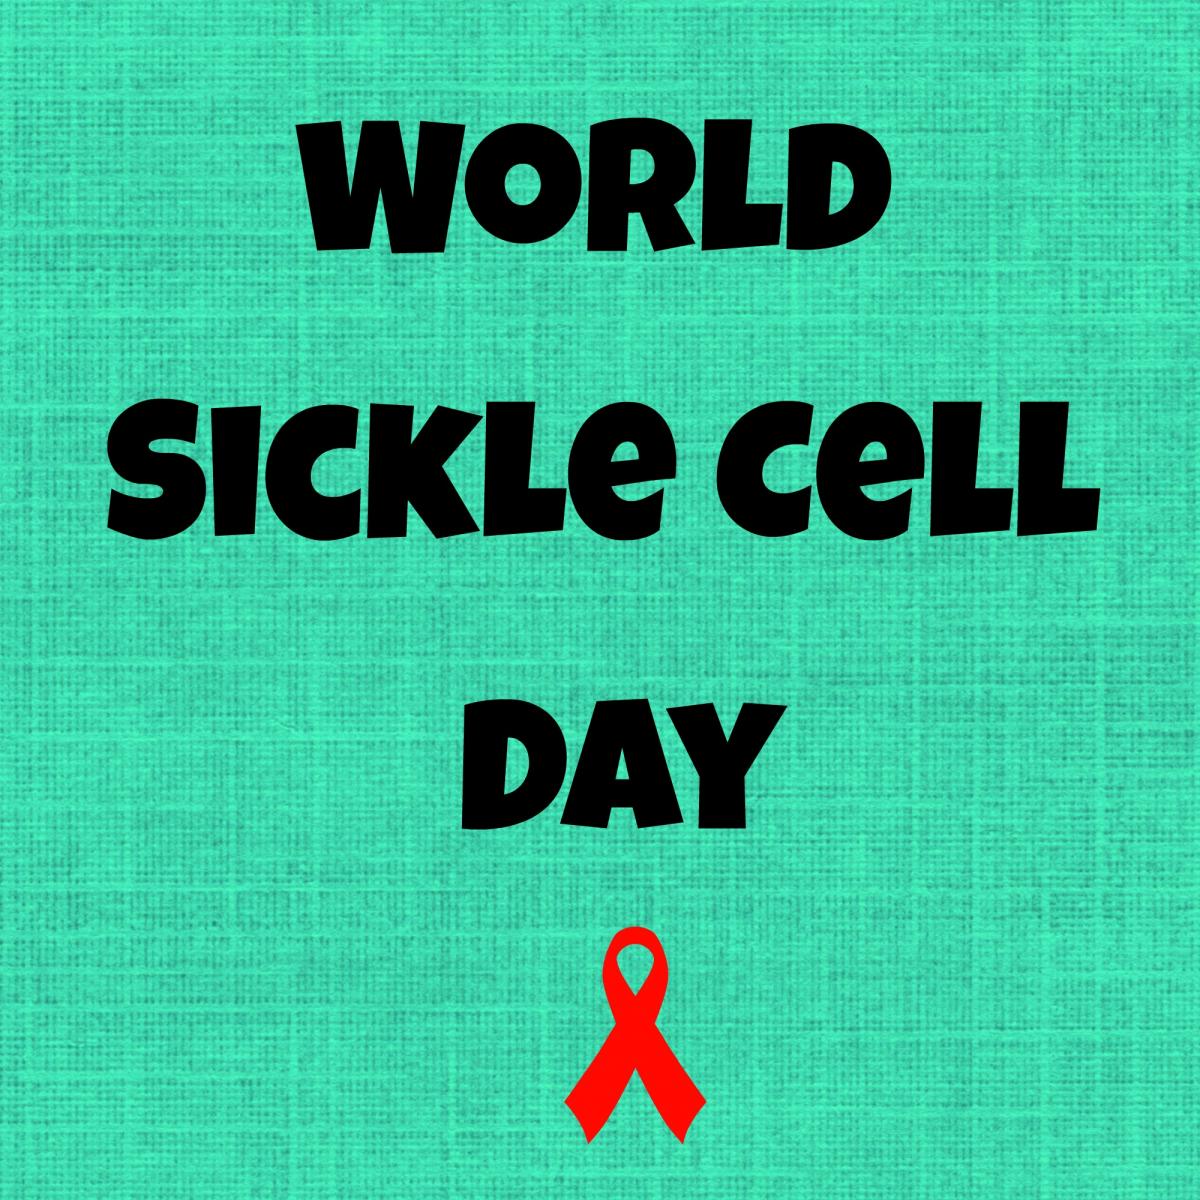 Do You Know About World Sickle Cell Day And SCD?